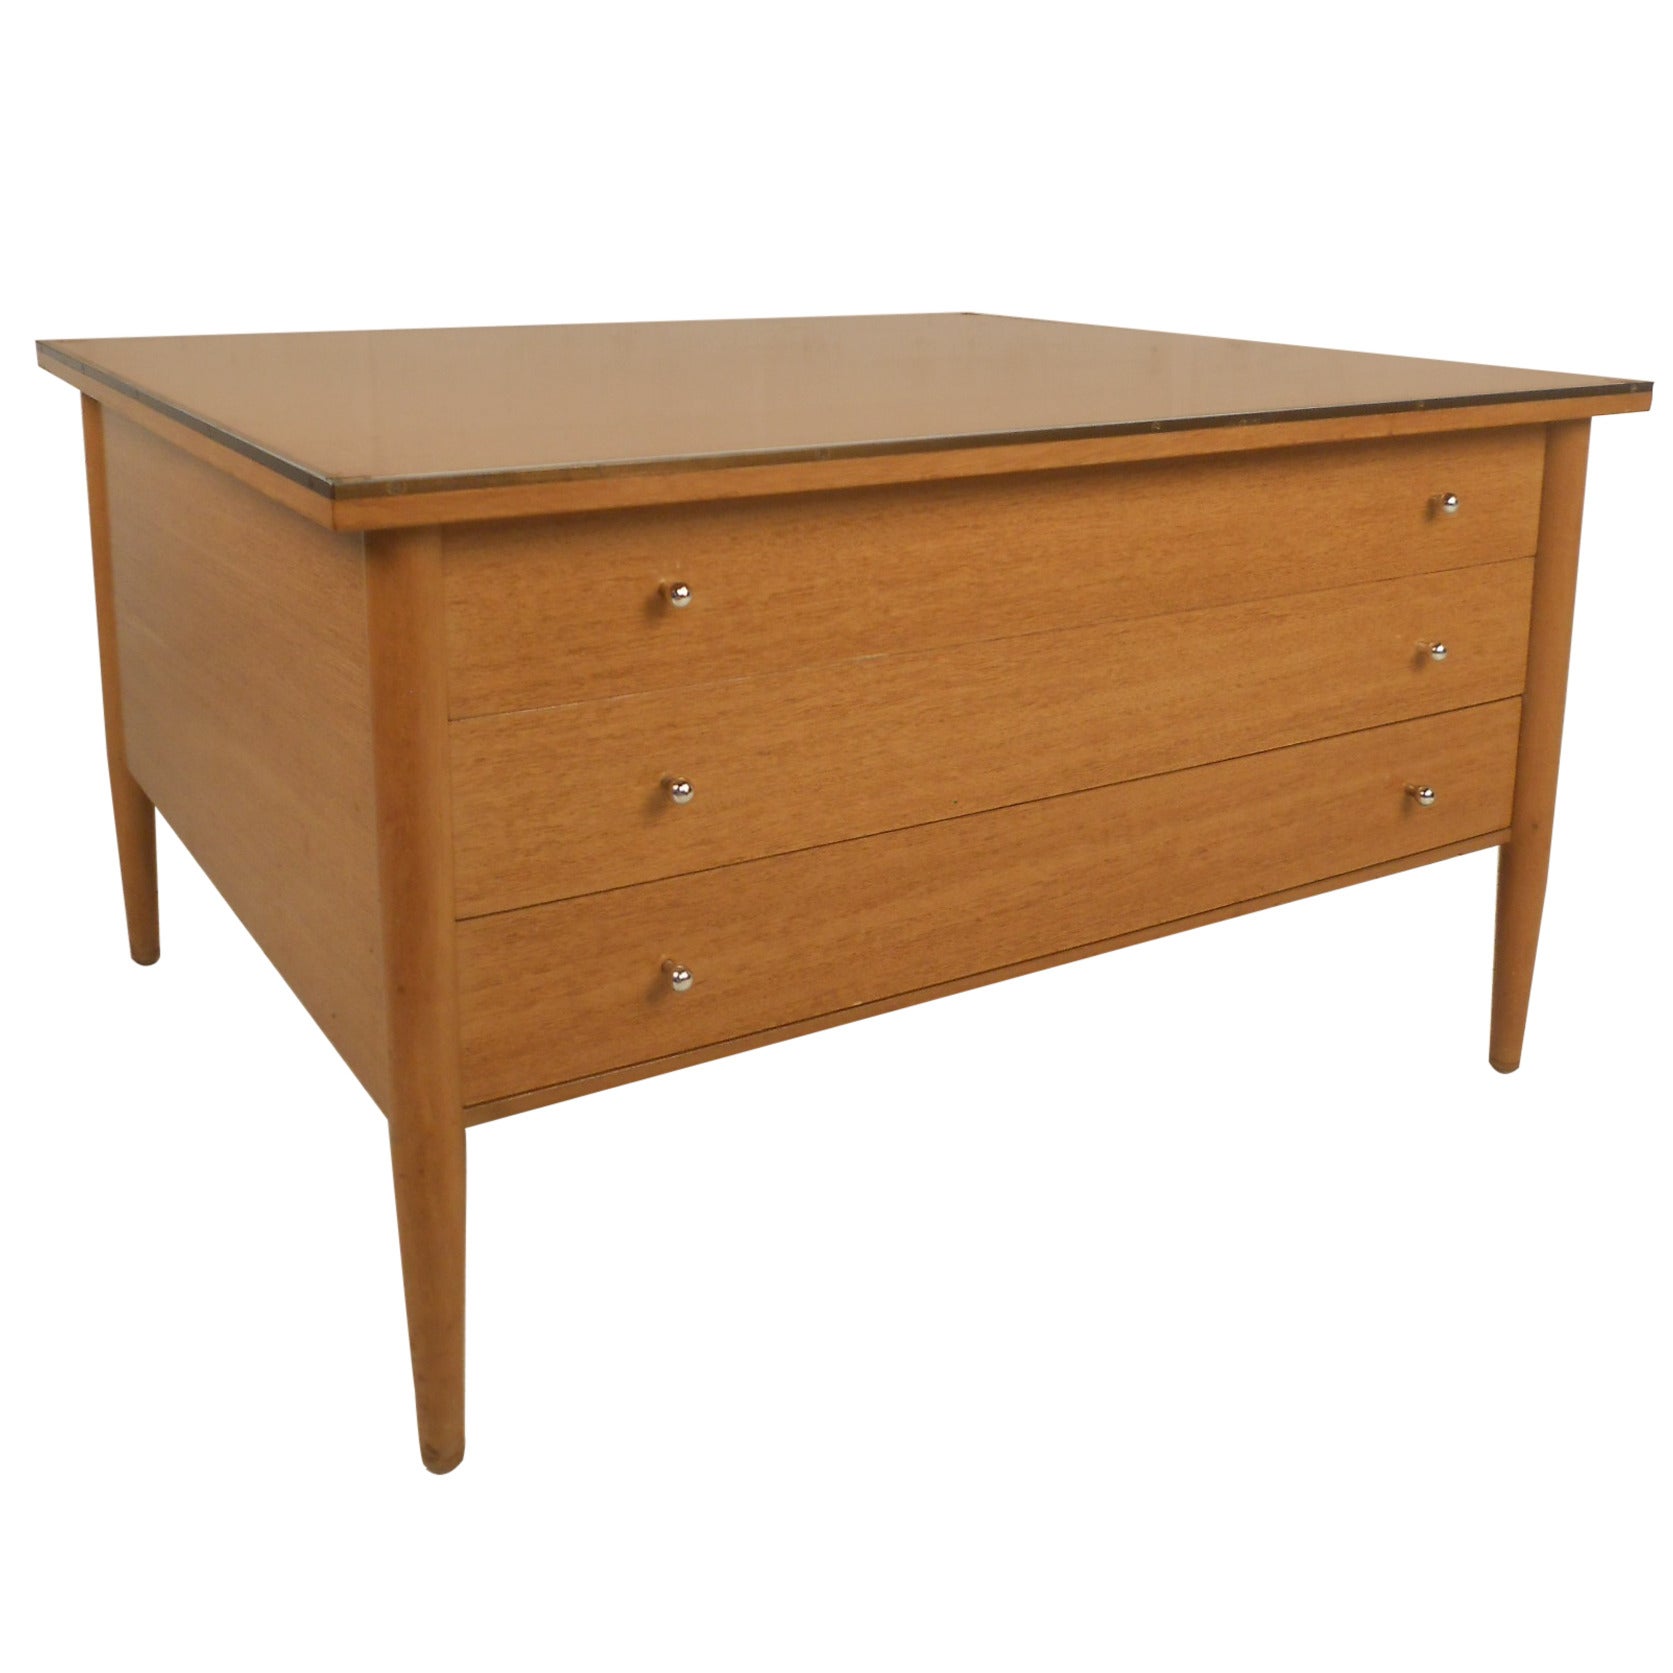 Paul McCobb Three-Drawer Occasional Table from The Connoisseur Collection